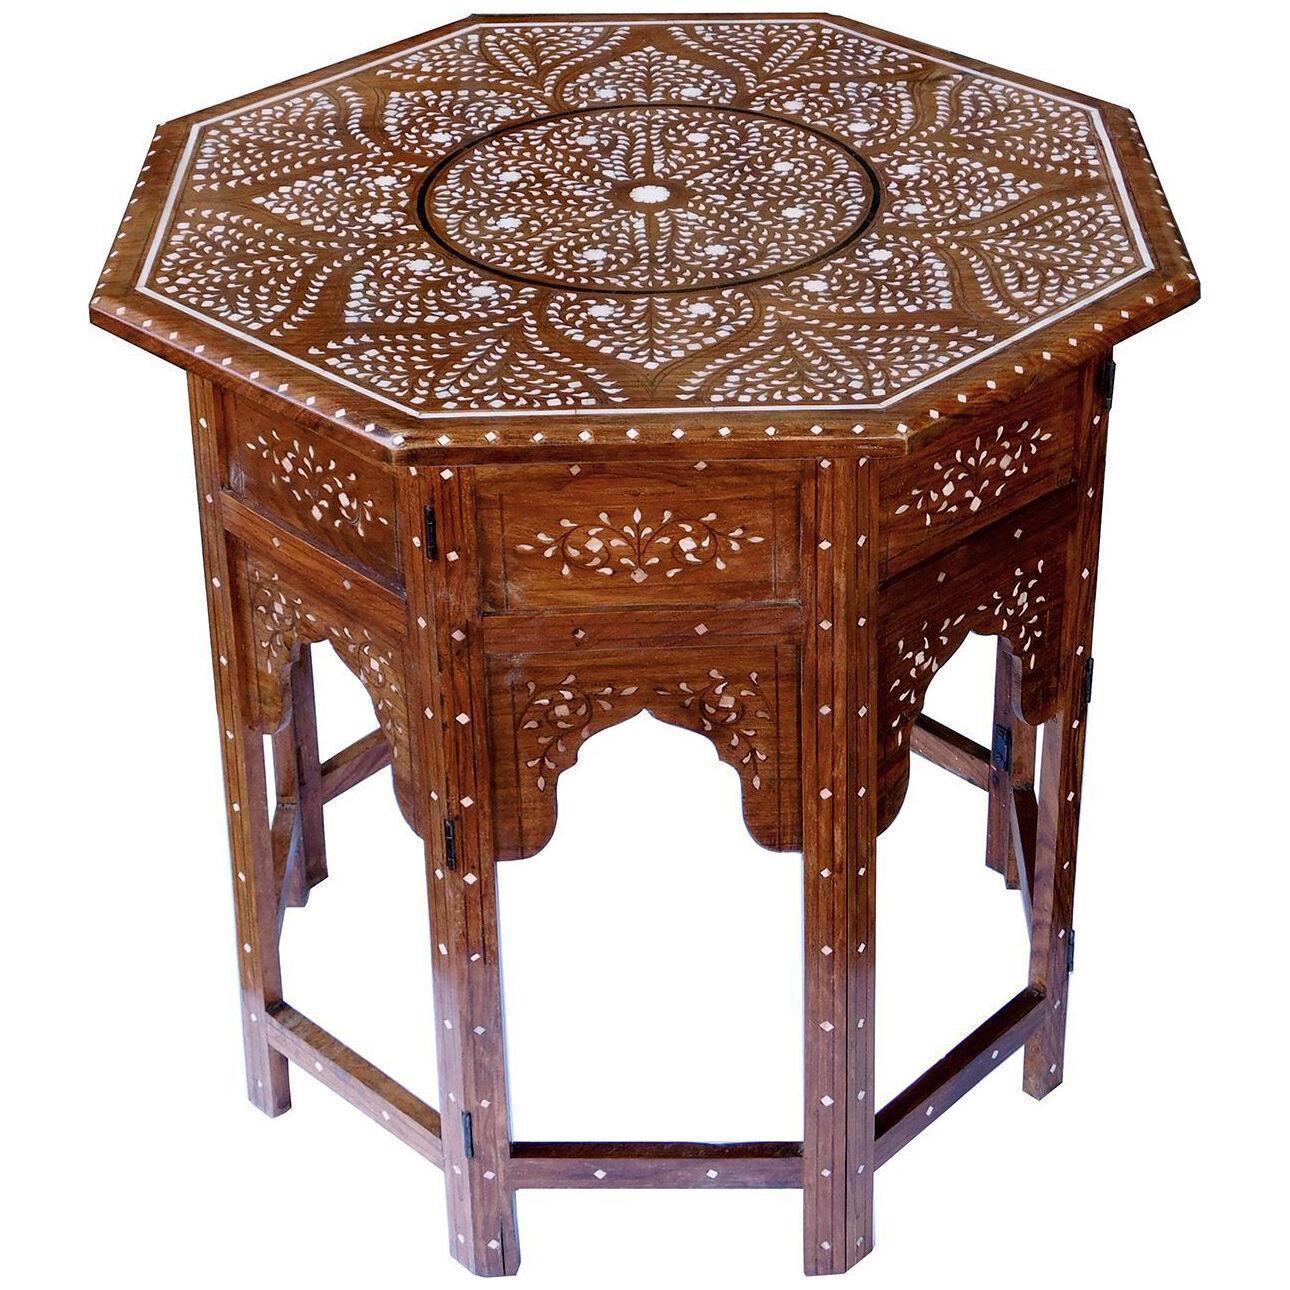 A large & intricately inlaid Anglo Indian octagonal side/traveling table